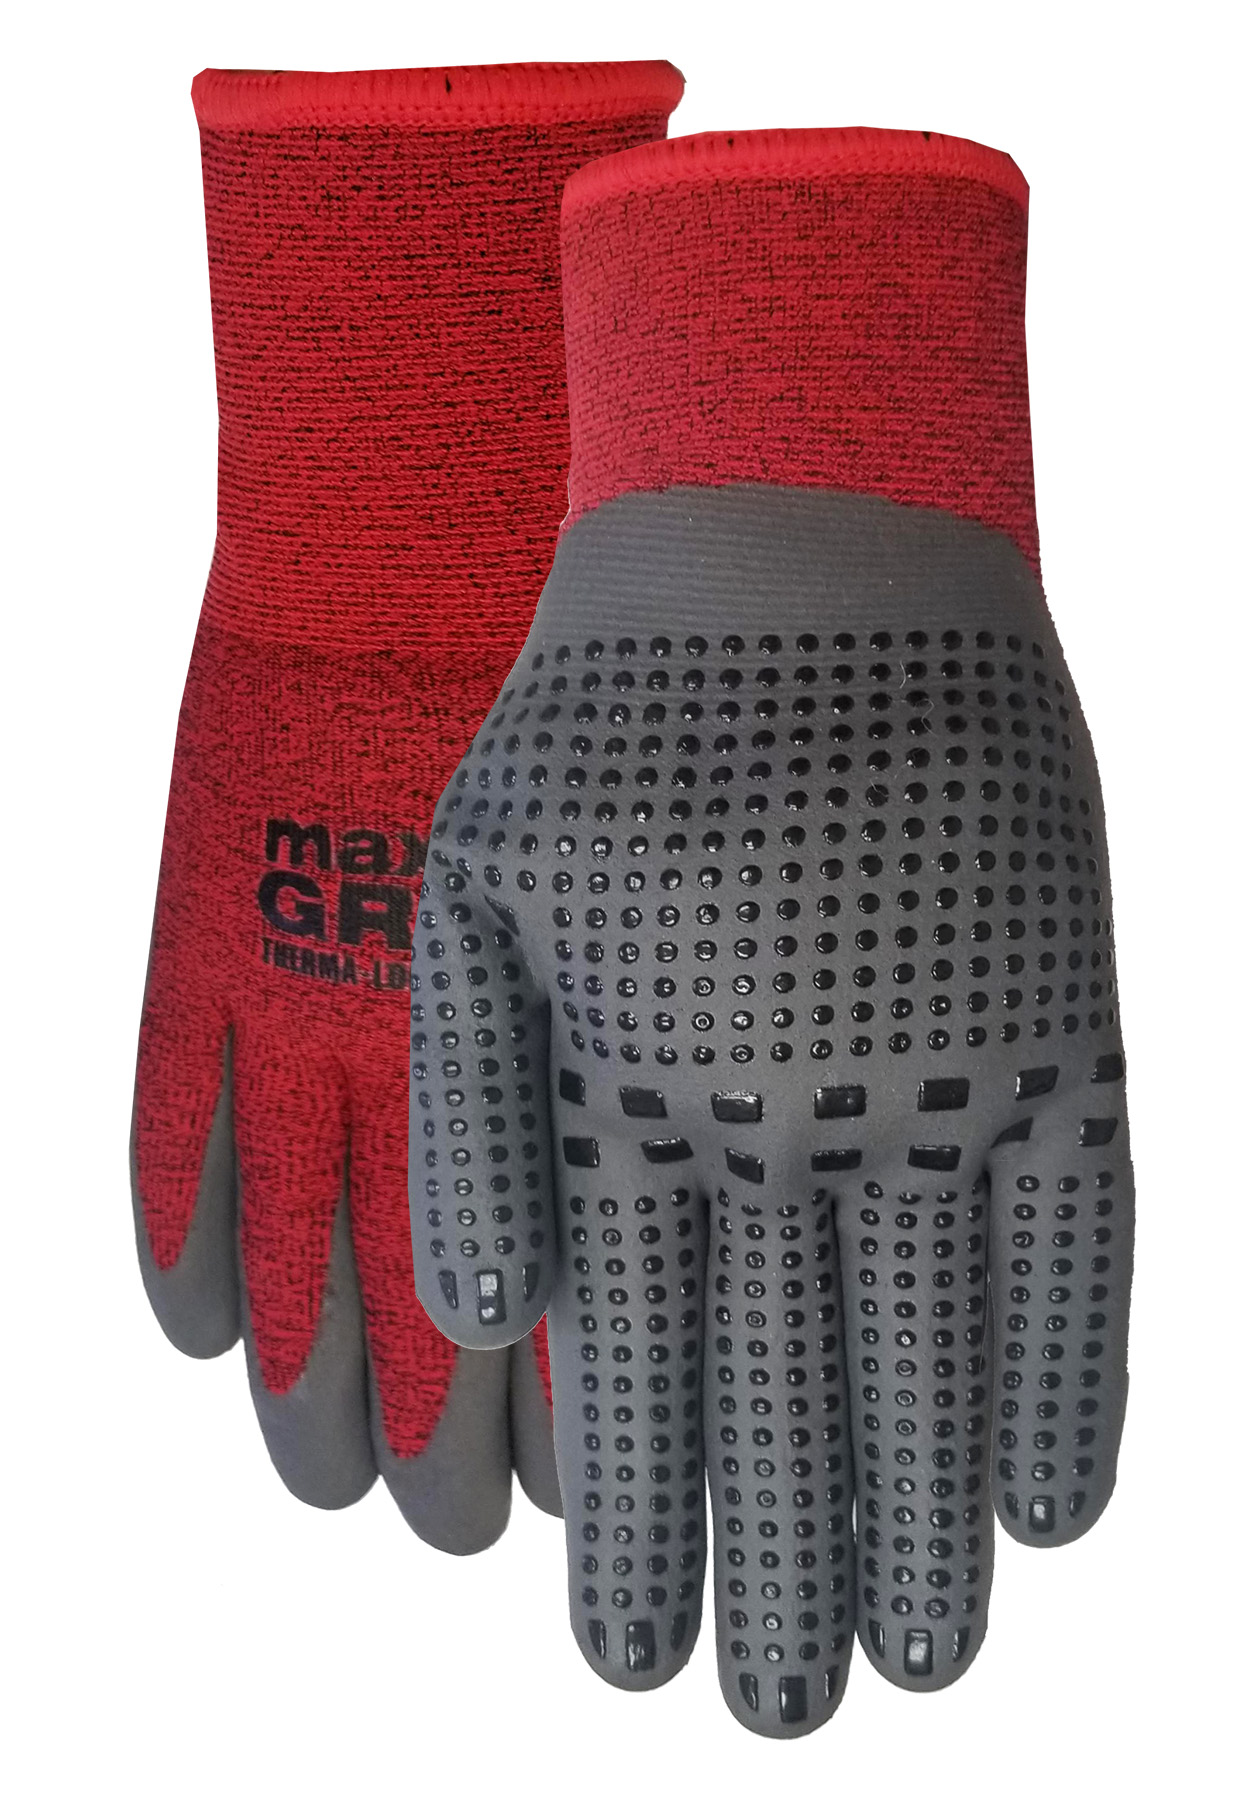 MAX Grip™ THERMA-LOCK™ lined - Midwest Glove